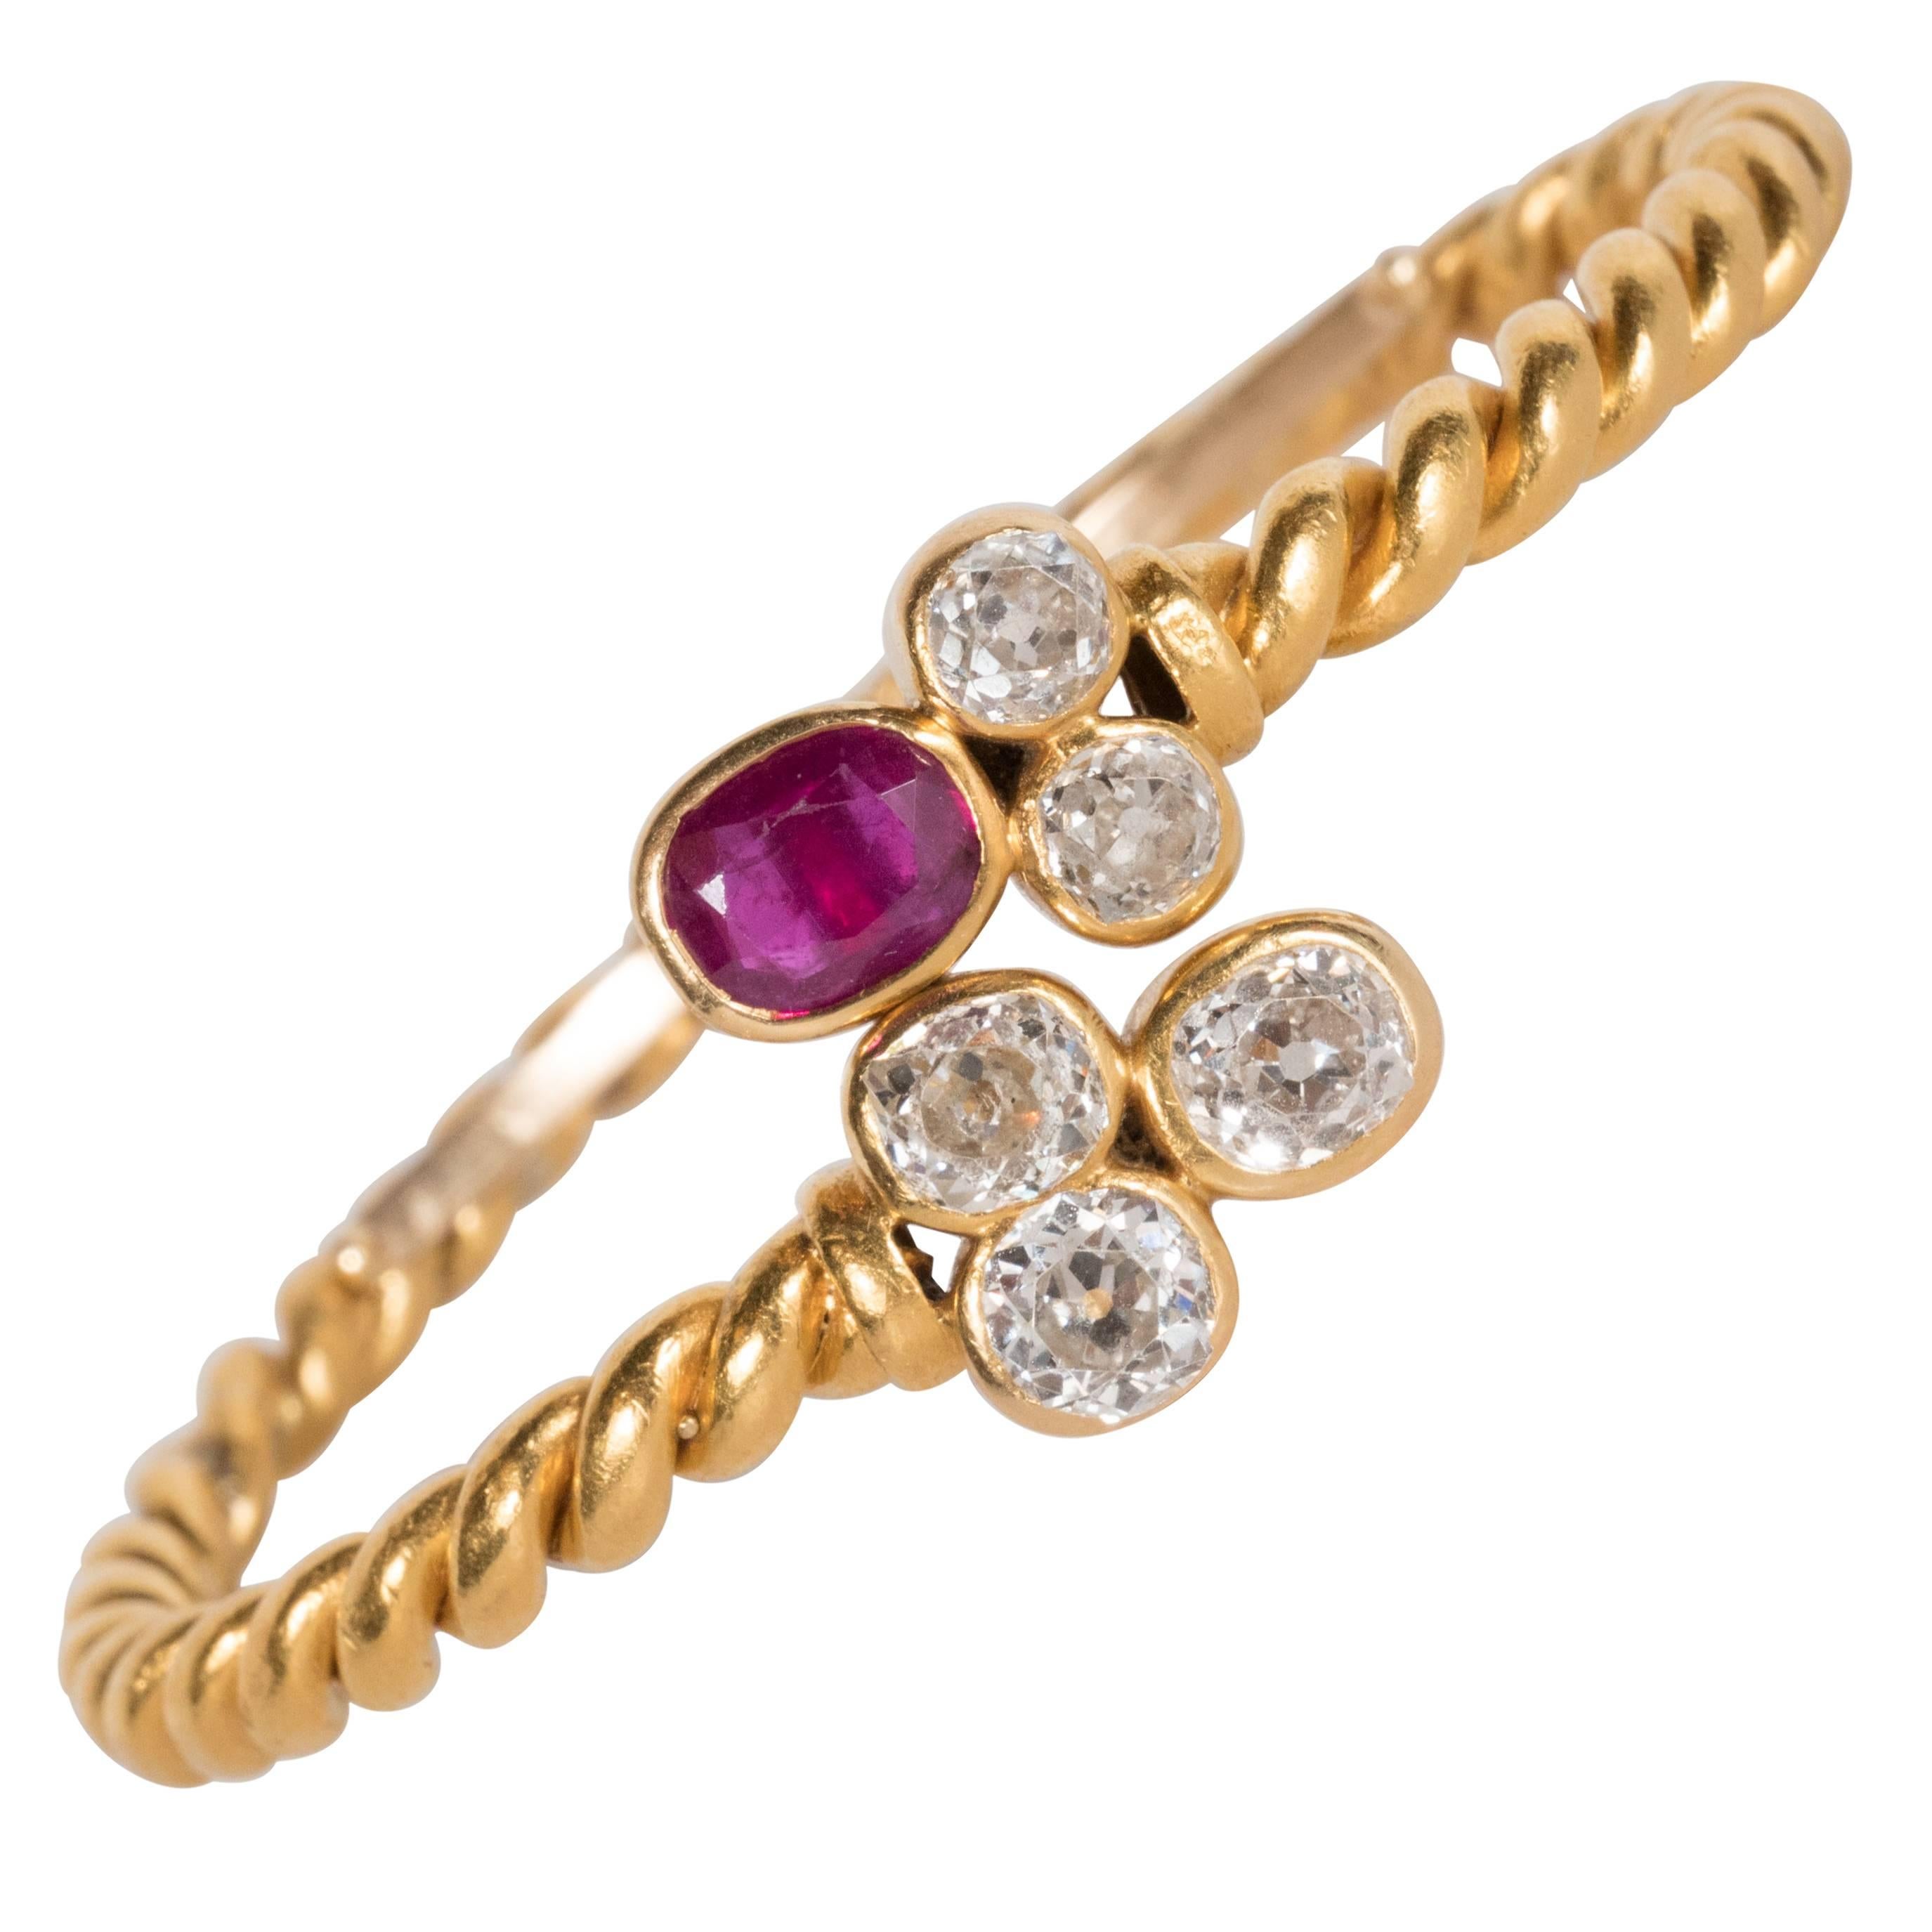 Hand-Wrought 18 Karat Bangle Bracelet with Ruby and Old European Cut Diamonds